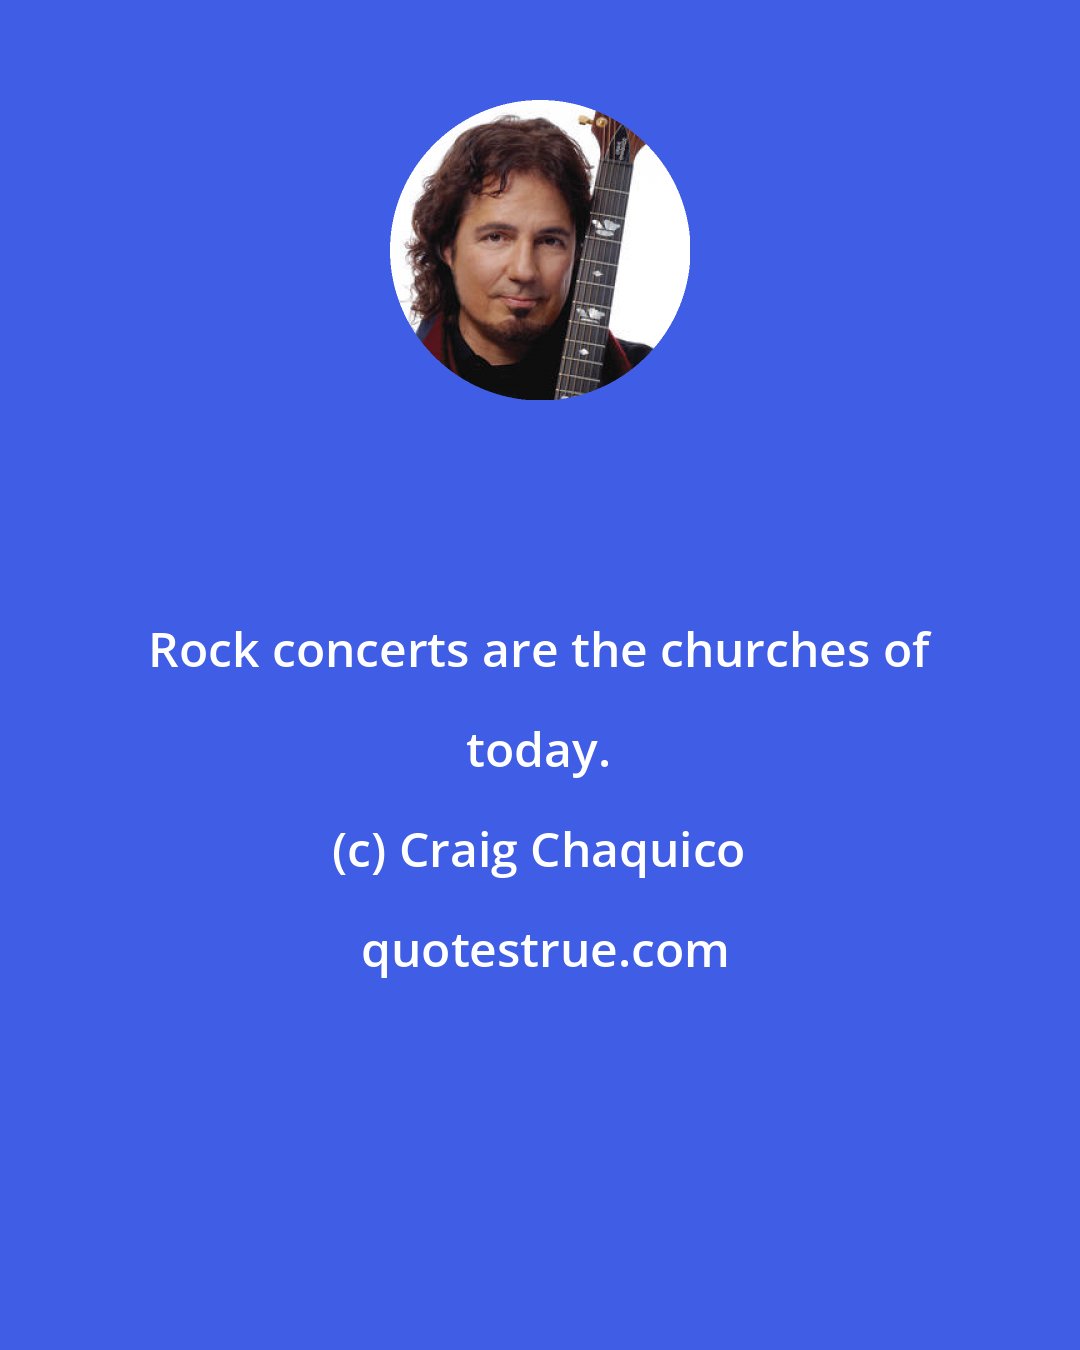 Craig Chaquico: Rock concerts are the churches of today.